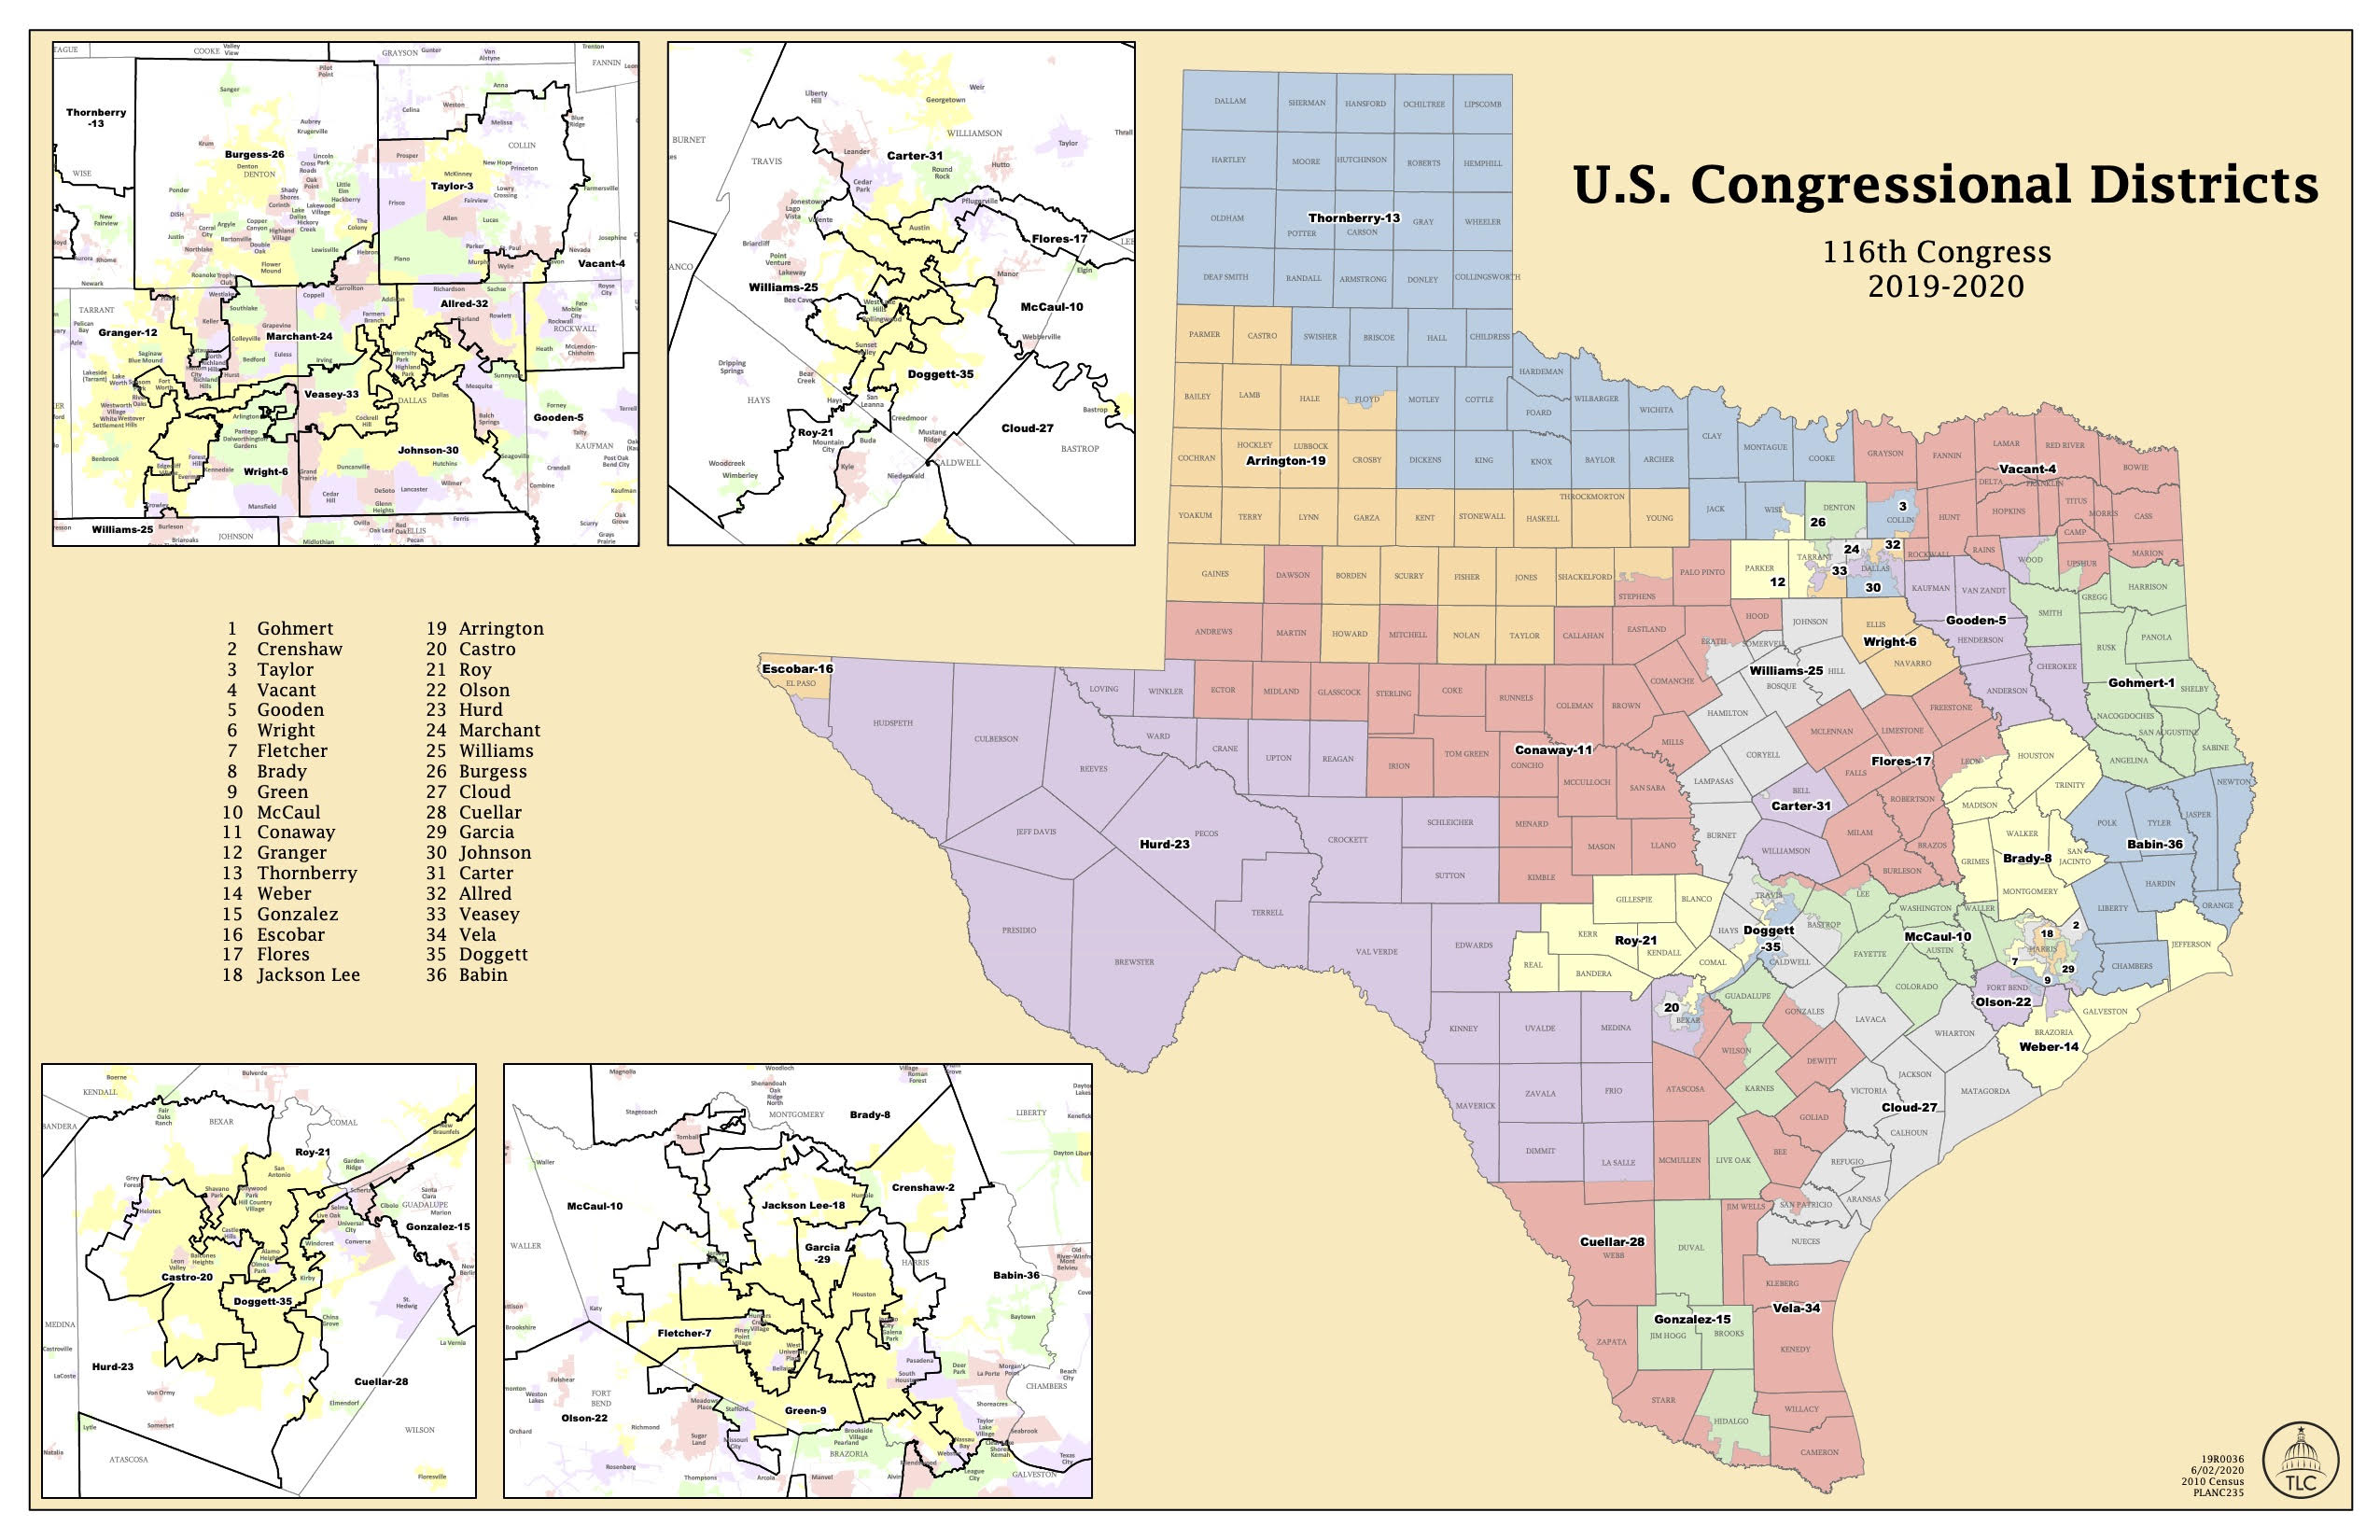 Texas U.S. Congressional Districts, 116th Congress, 2019-2020